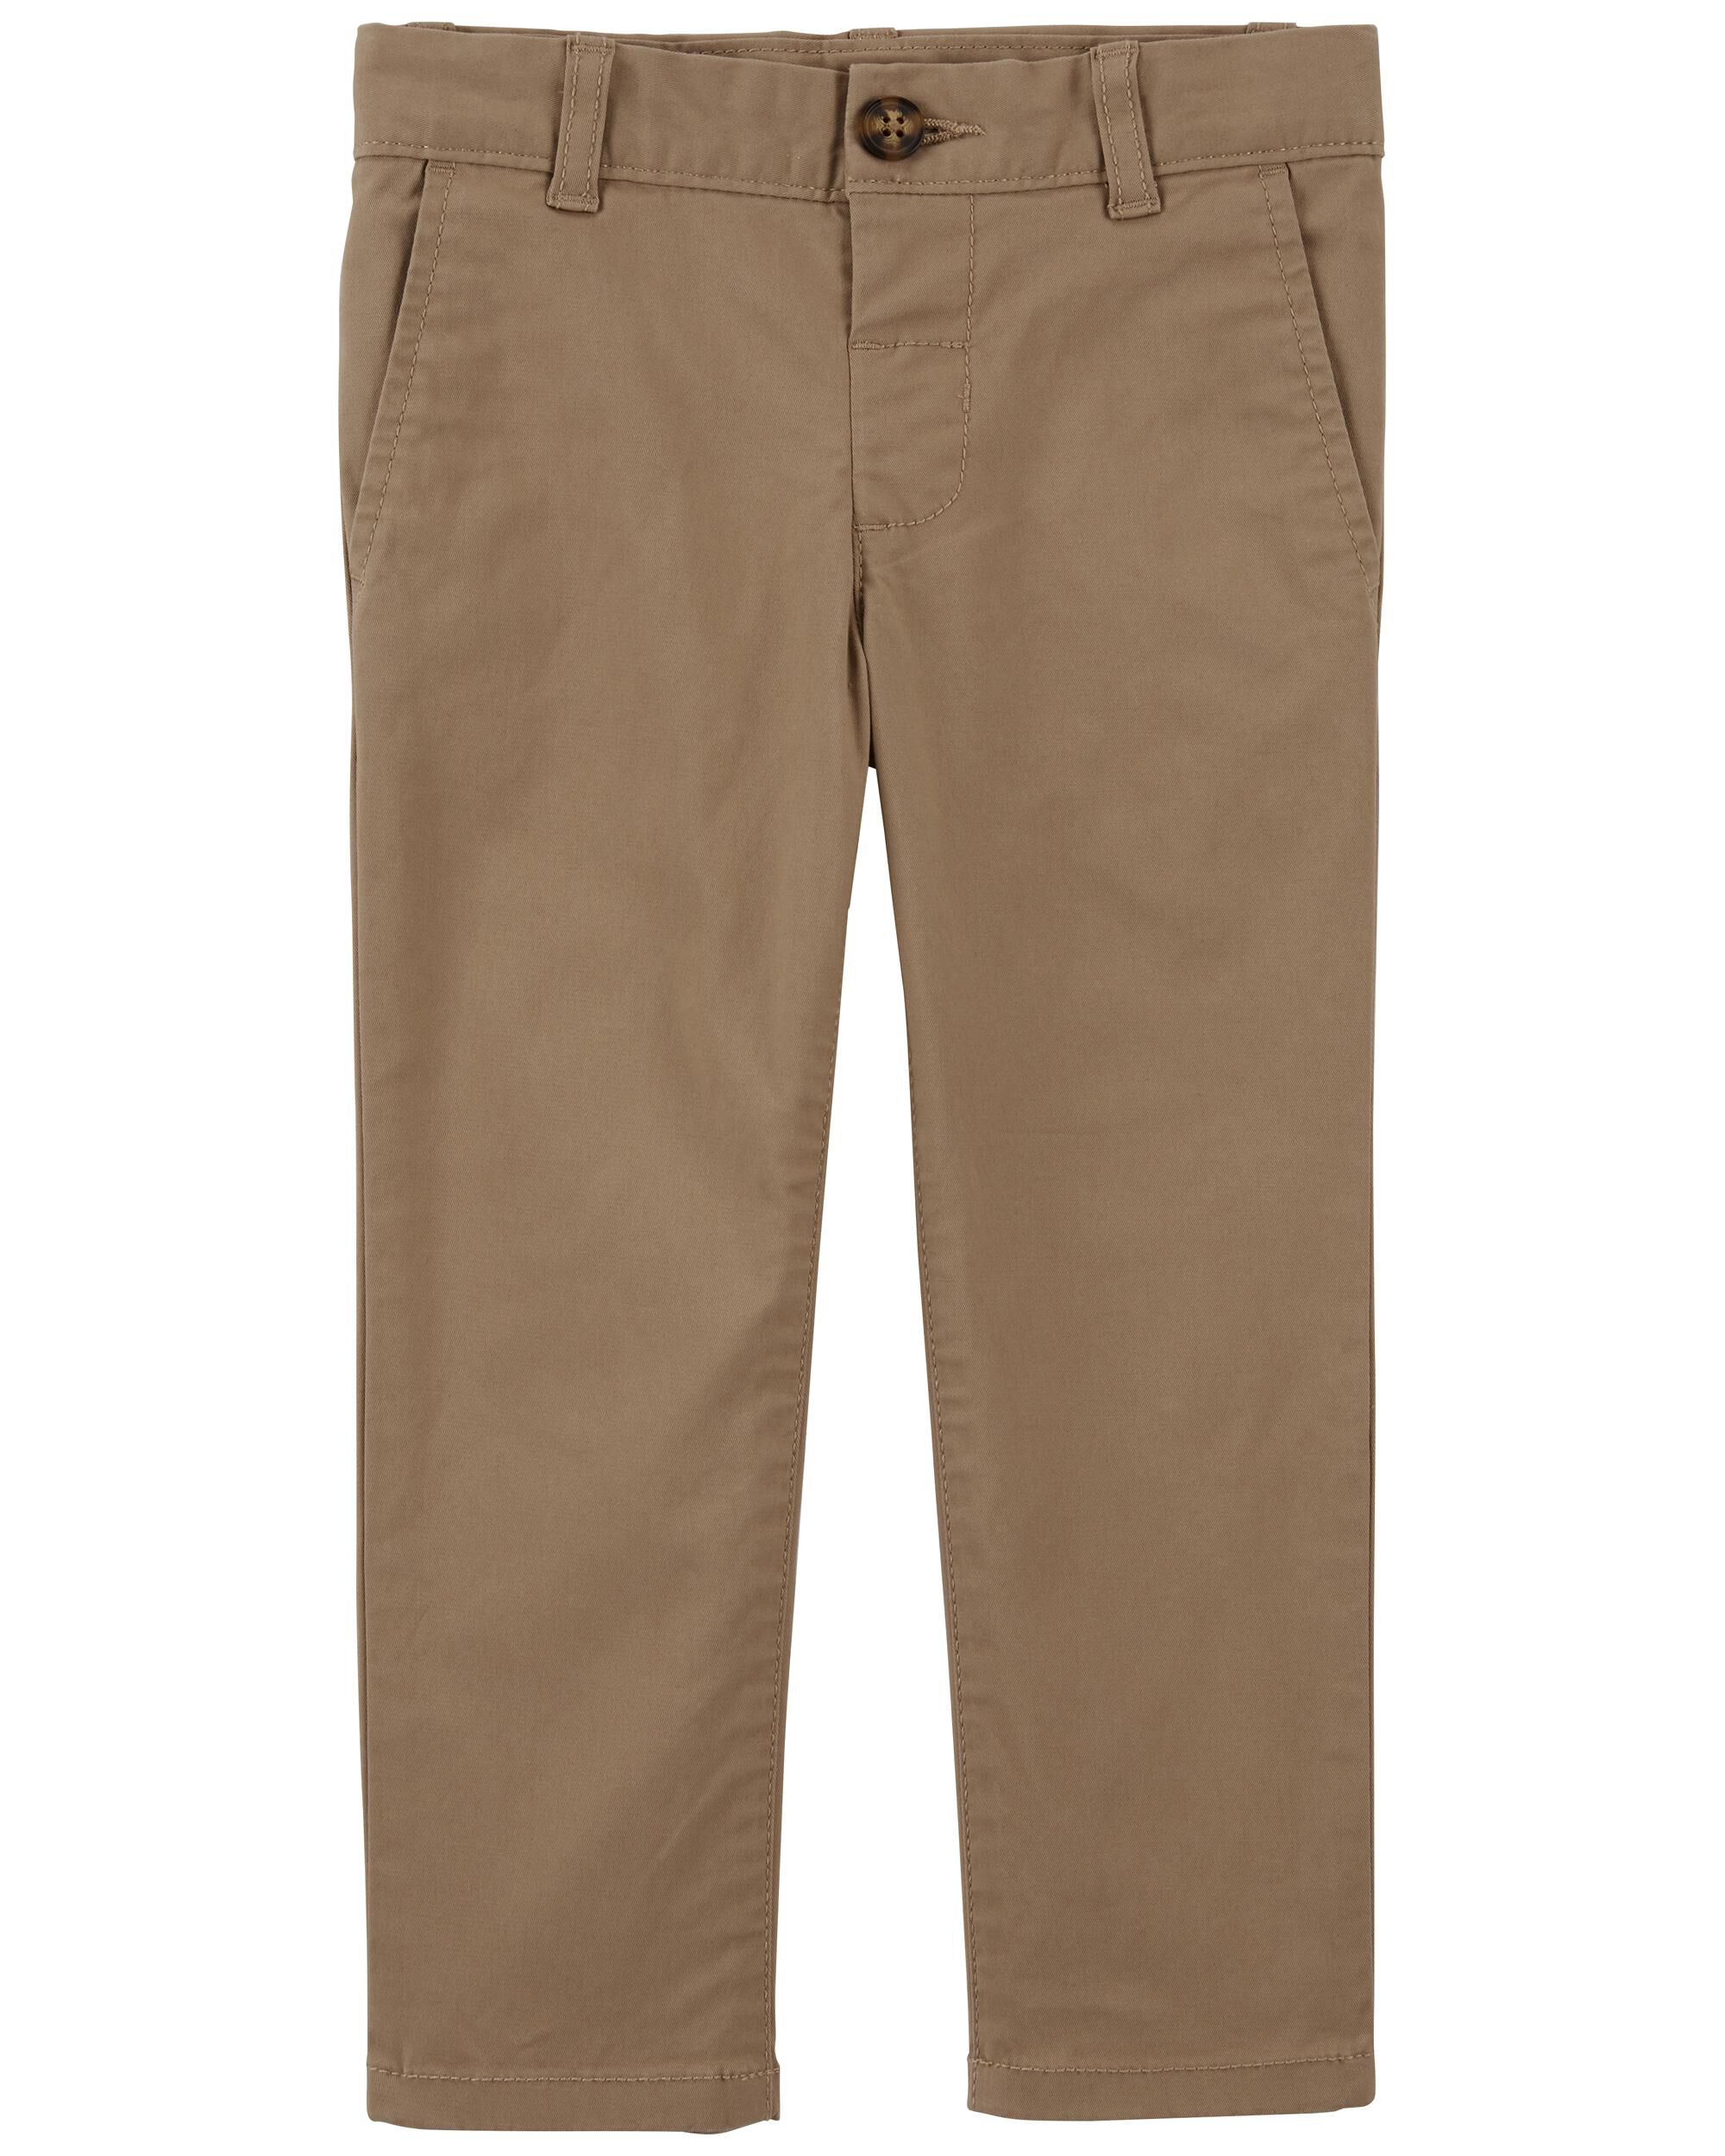 Carters Toddler Slim Stretch Chino Pants